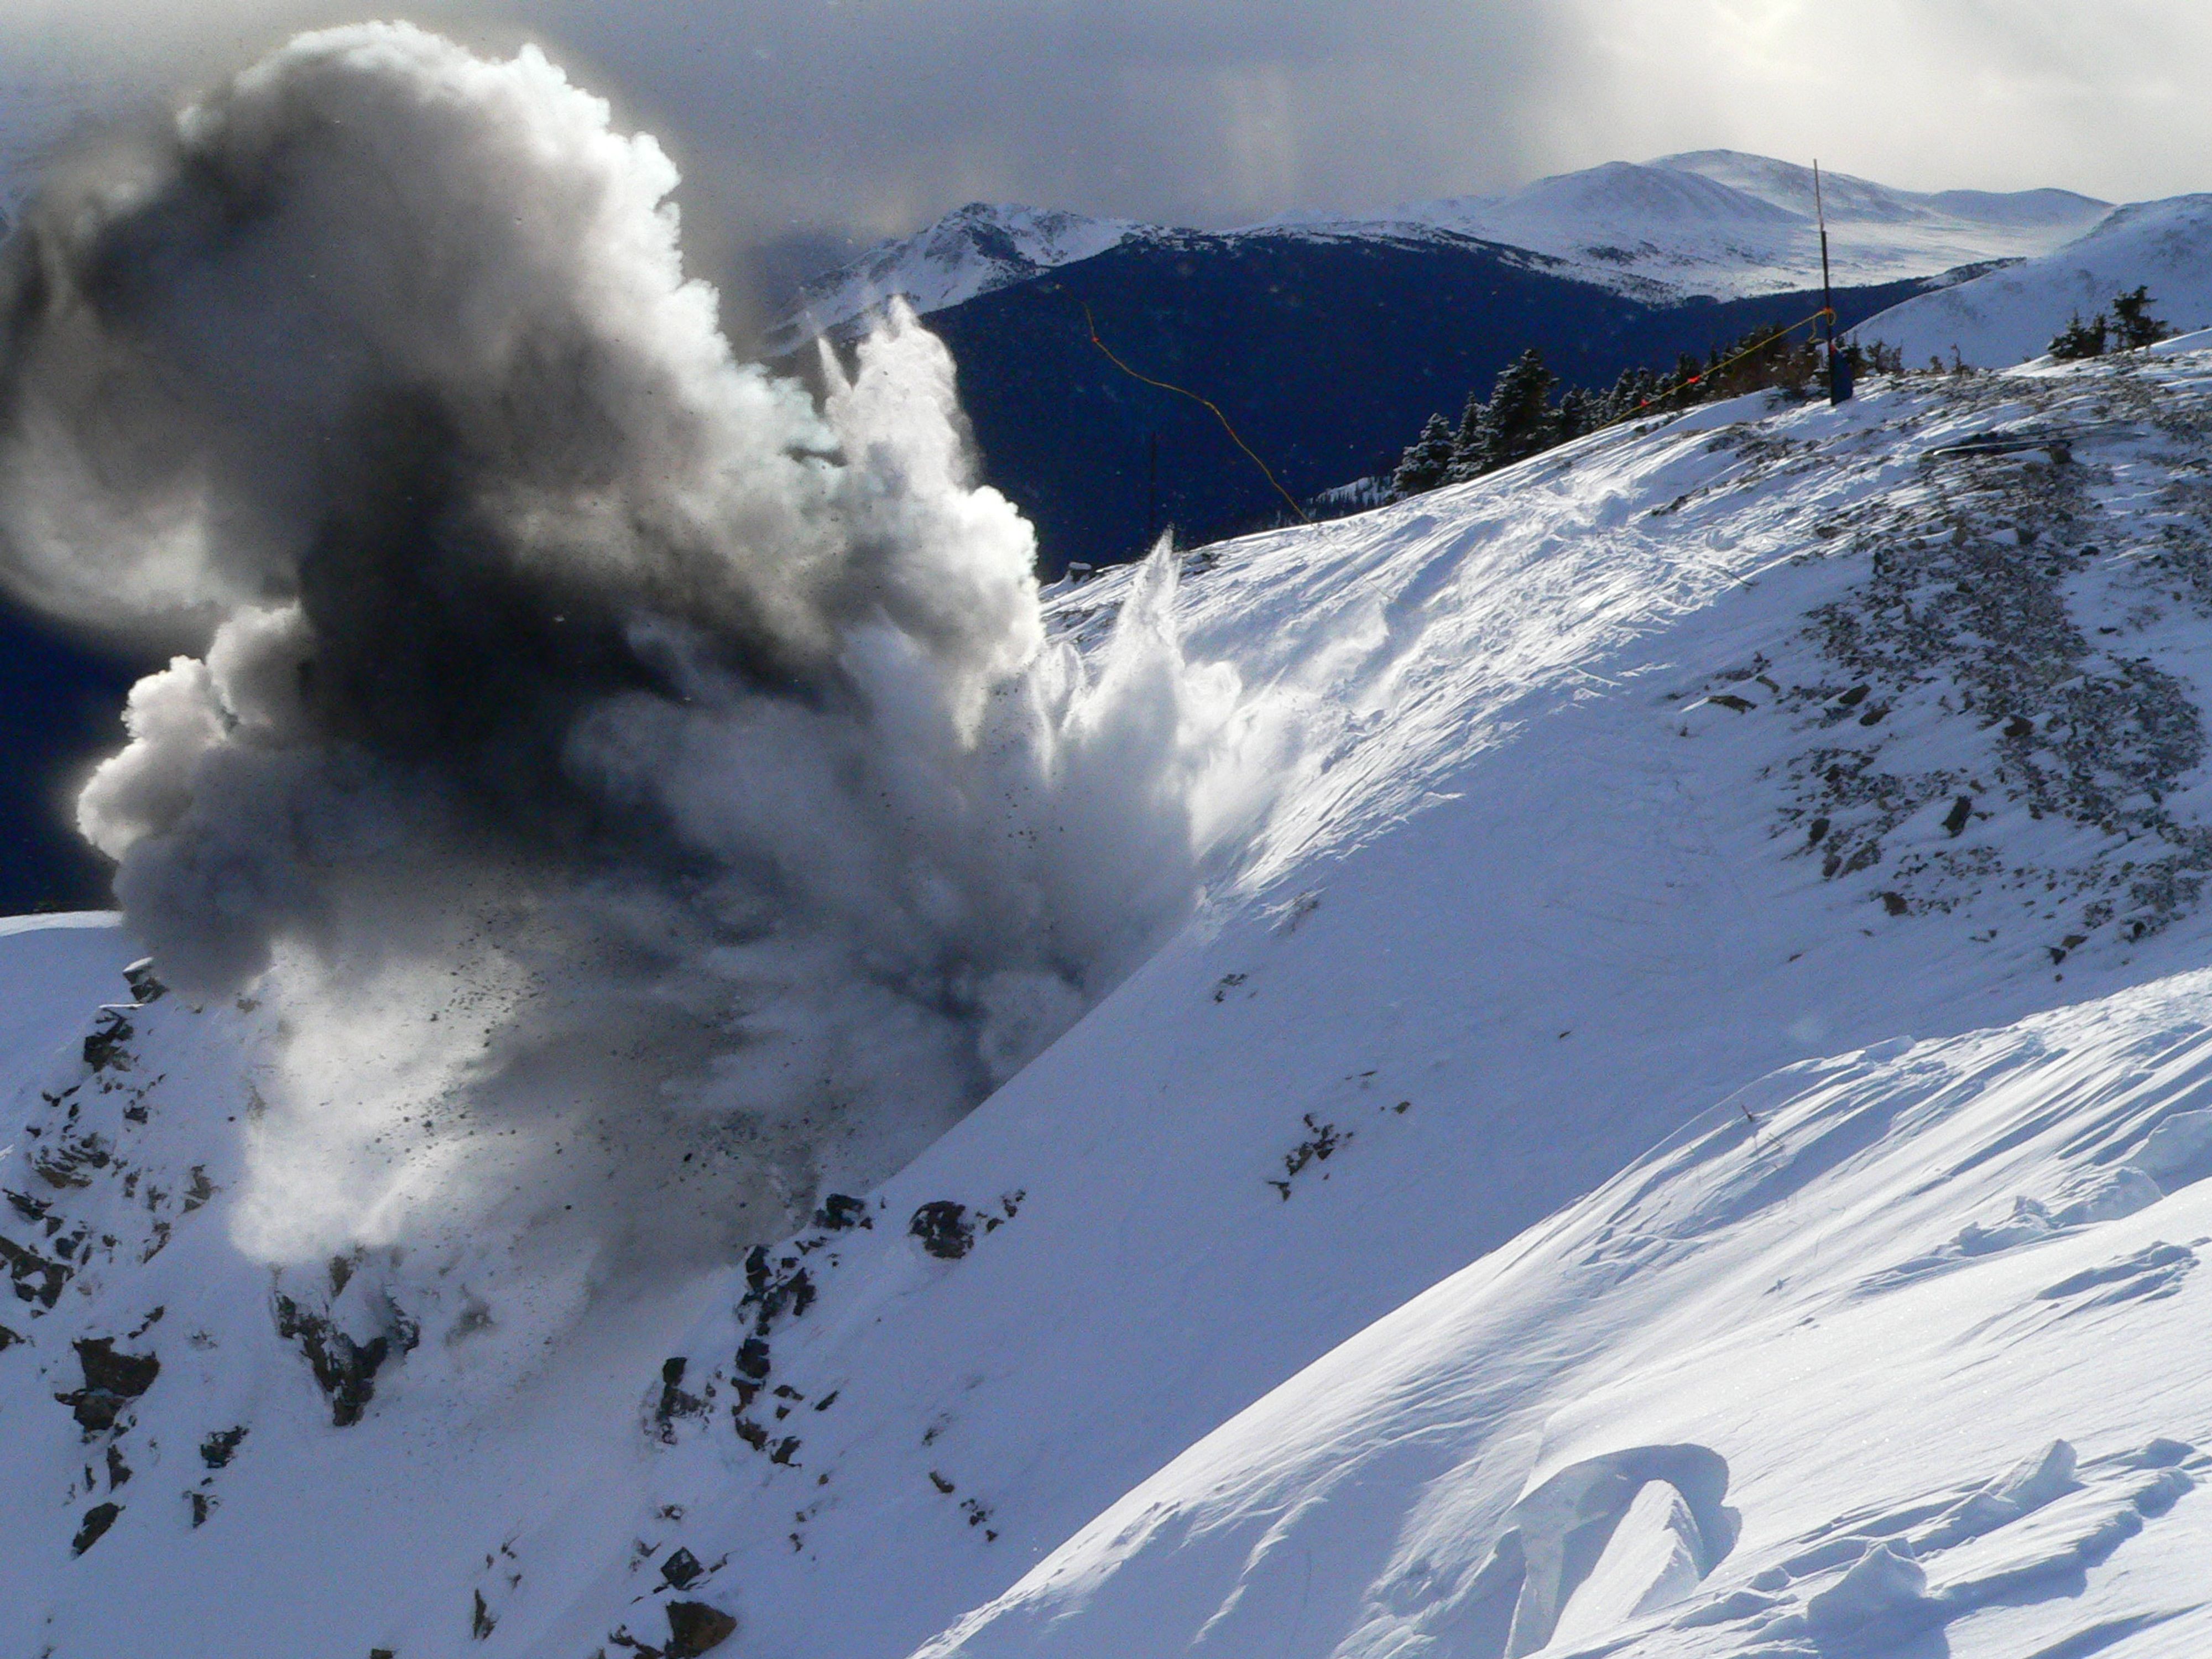 Explosives are used to trigger avalanches when no public is in an area in order to avoid large avalanches when the public is at risk